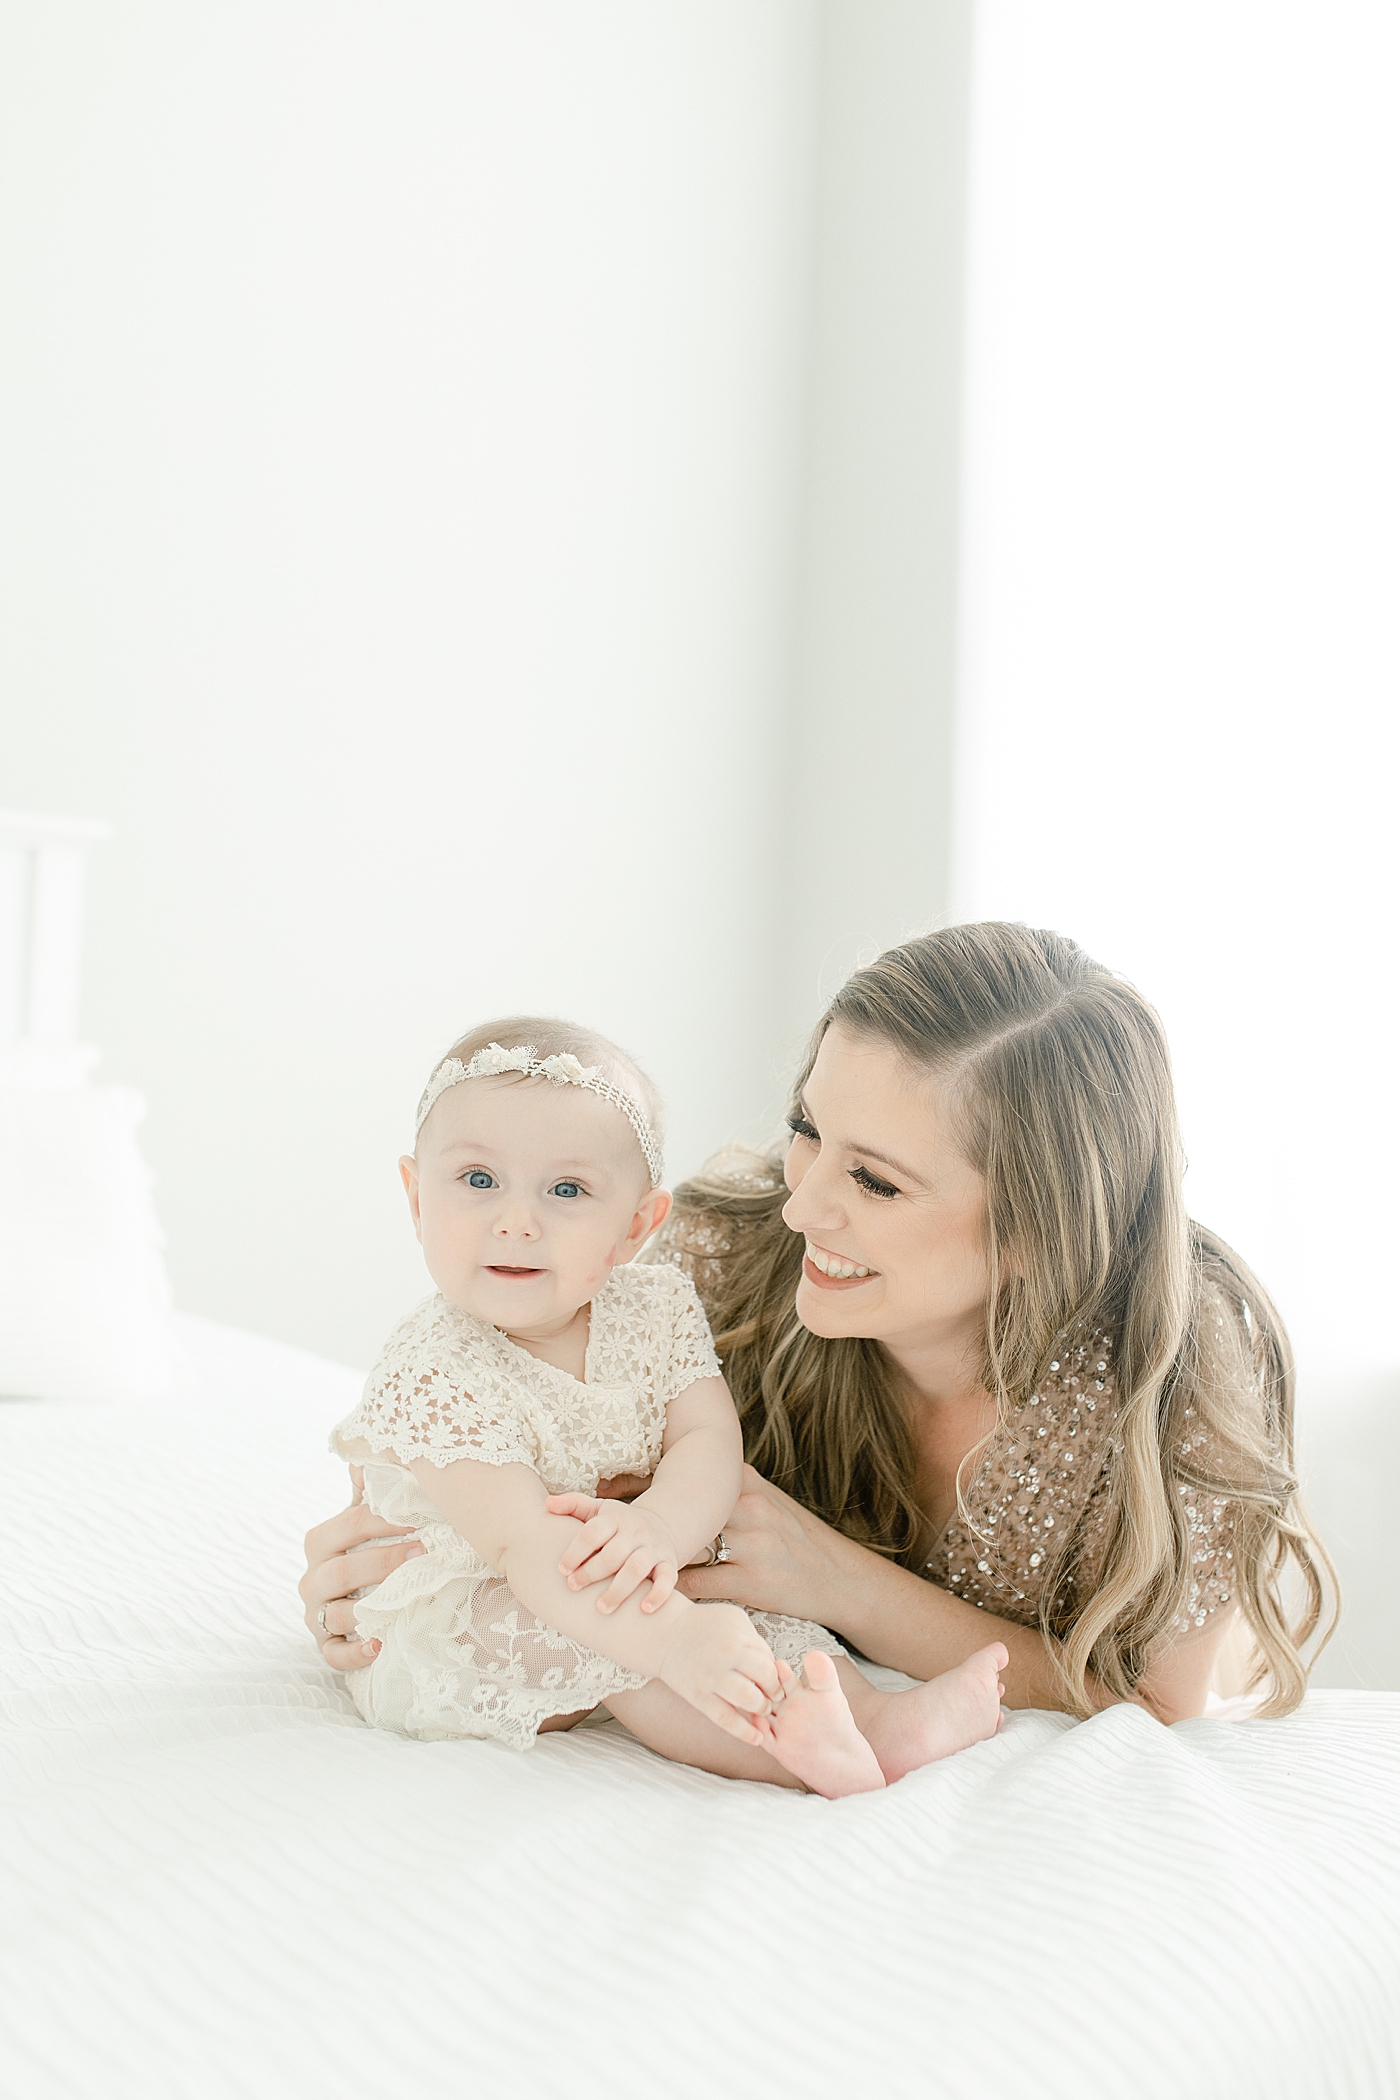 Mom and baby girl sitting on a bed for her sitter milestone session | Photo by Pass Christian baby photographer Little Sunshine Photography